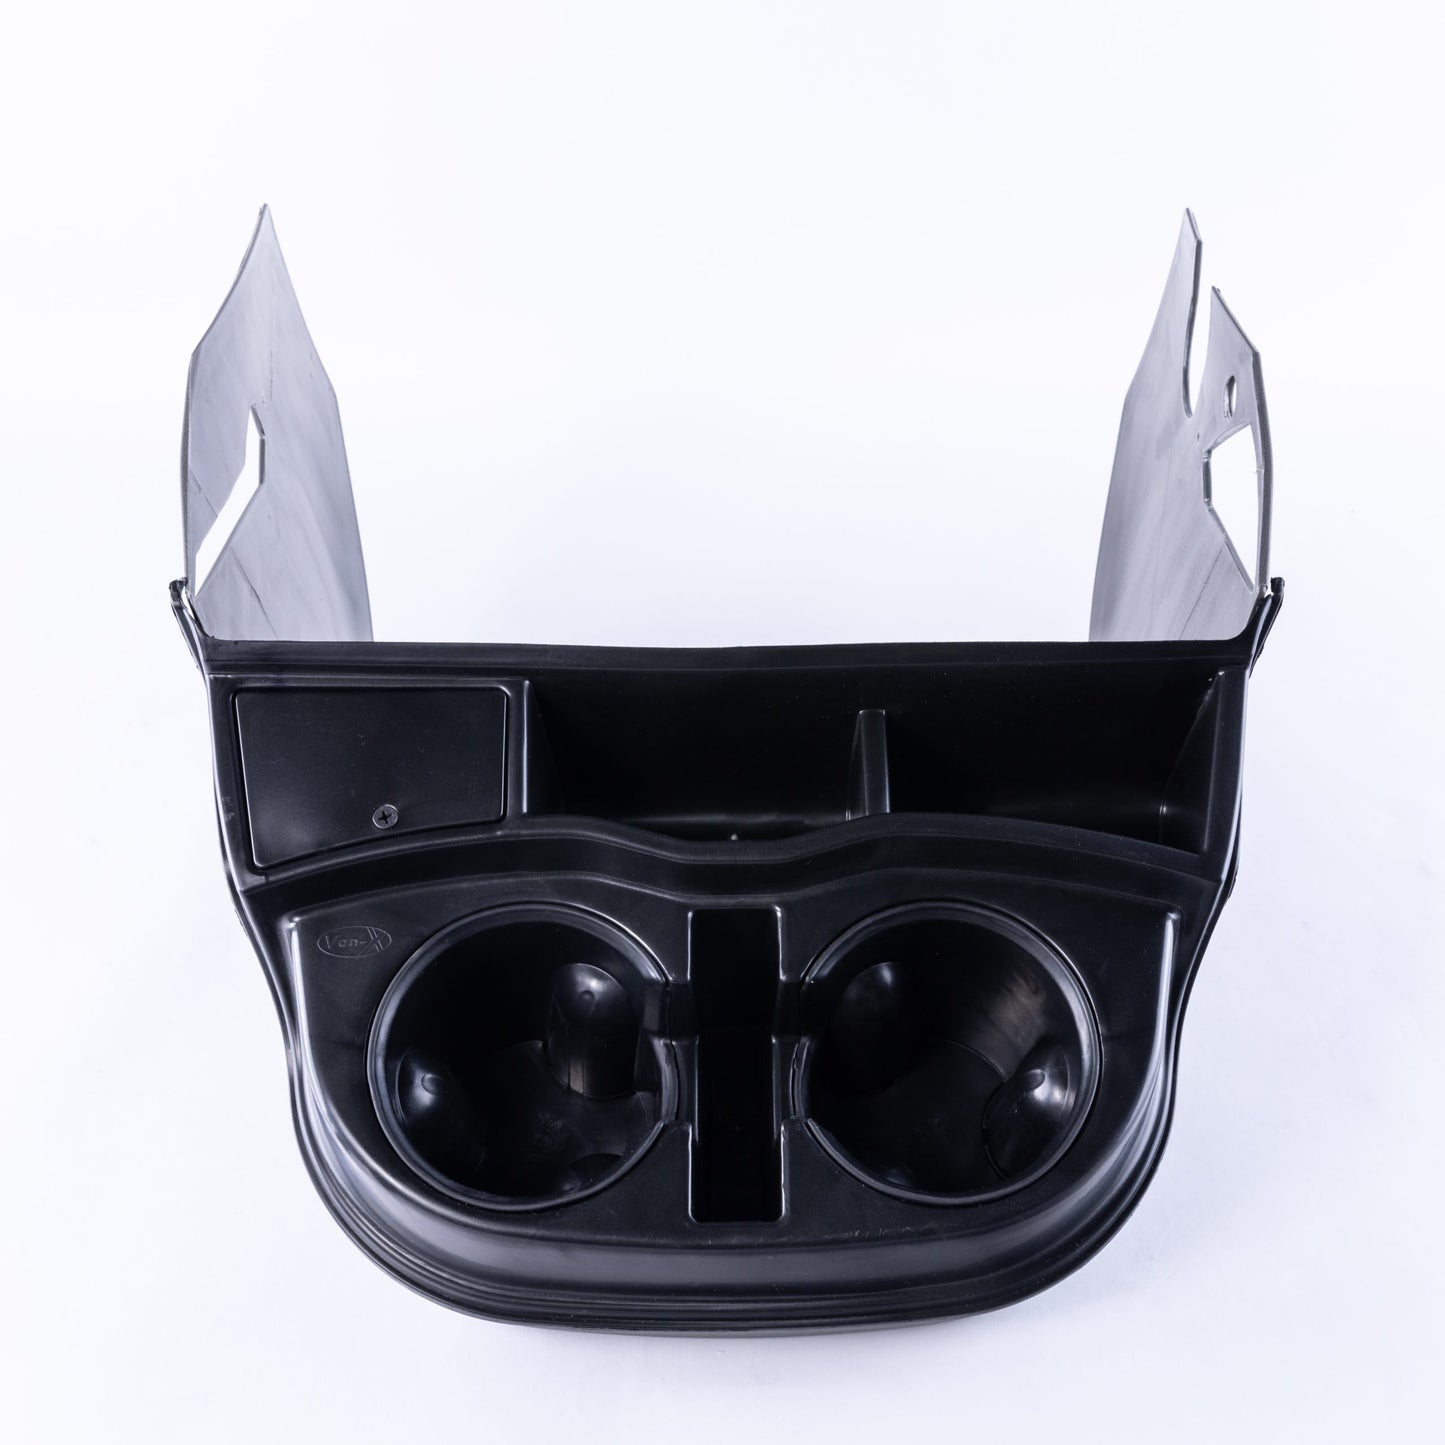 VAN-X VW T4 Cup Holder Console All in 1 Storage 0 - T4-404